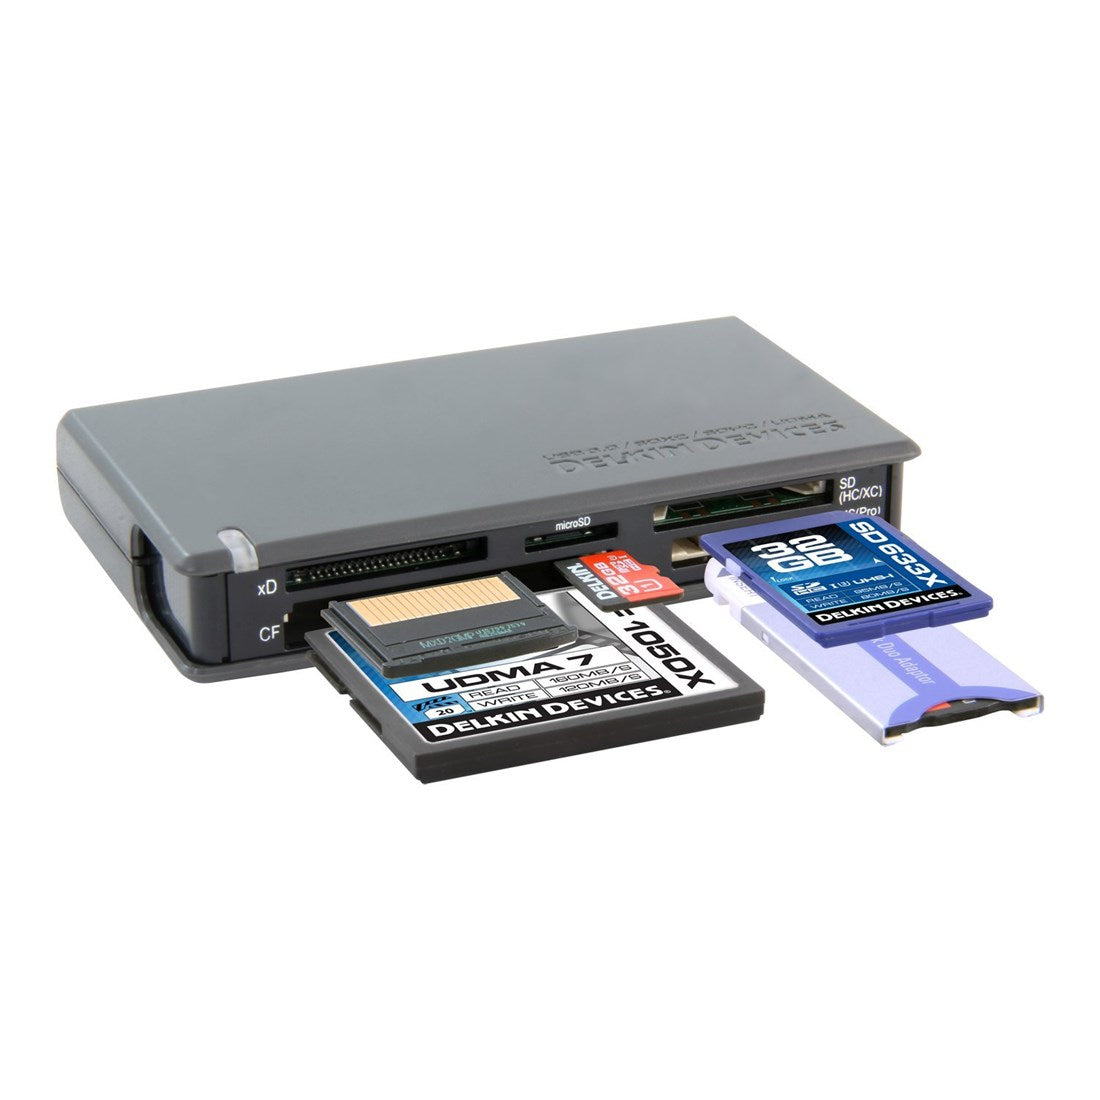 Product Image of Delkin USB 3.0 Universal Memory Card Reader